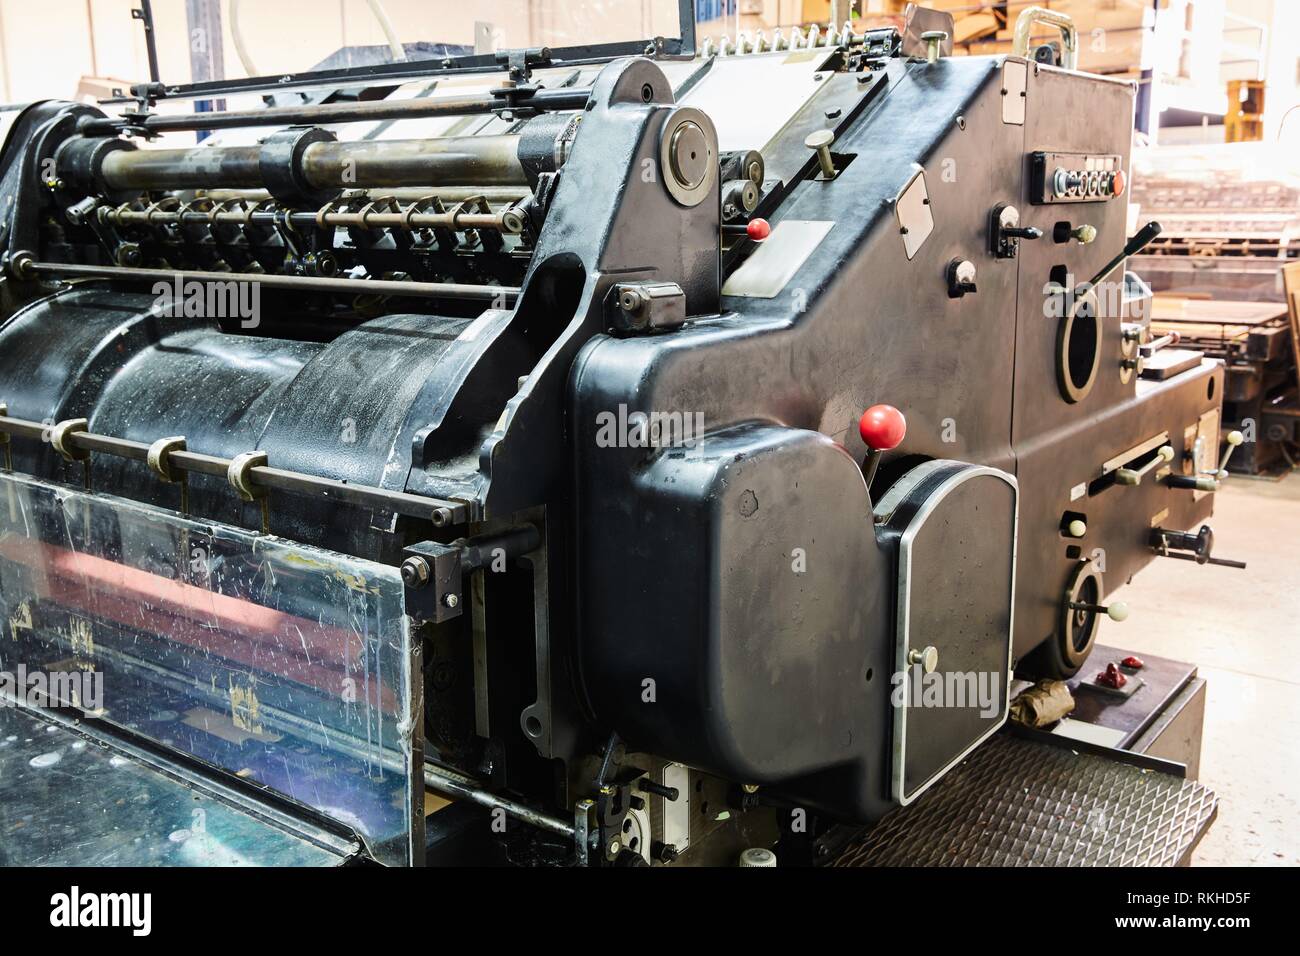 Printer lithography cylinder machine in a printing factory. Stock Photo